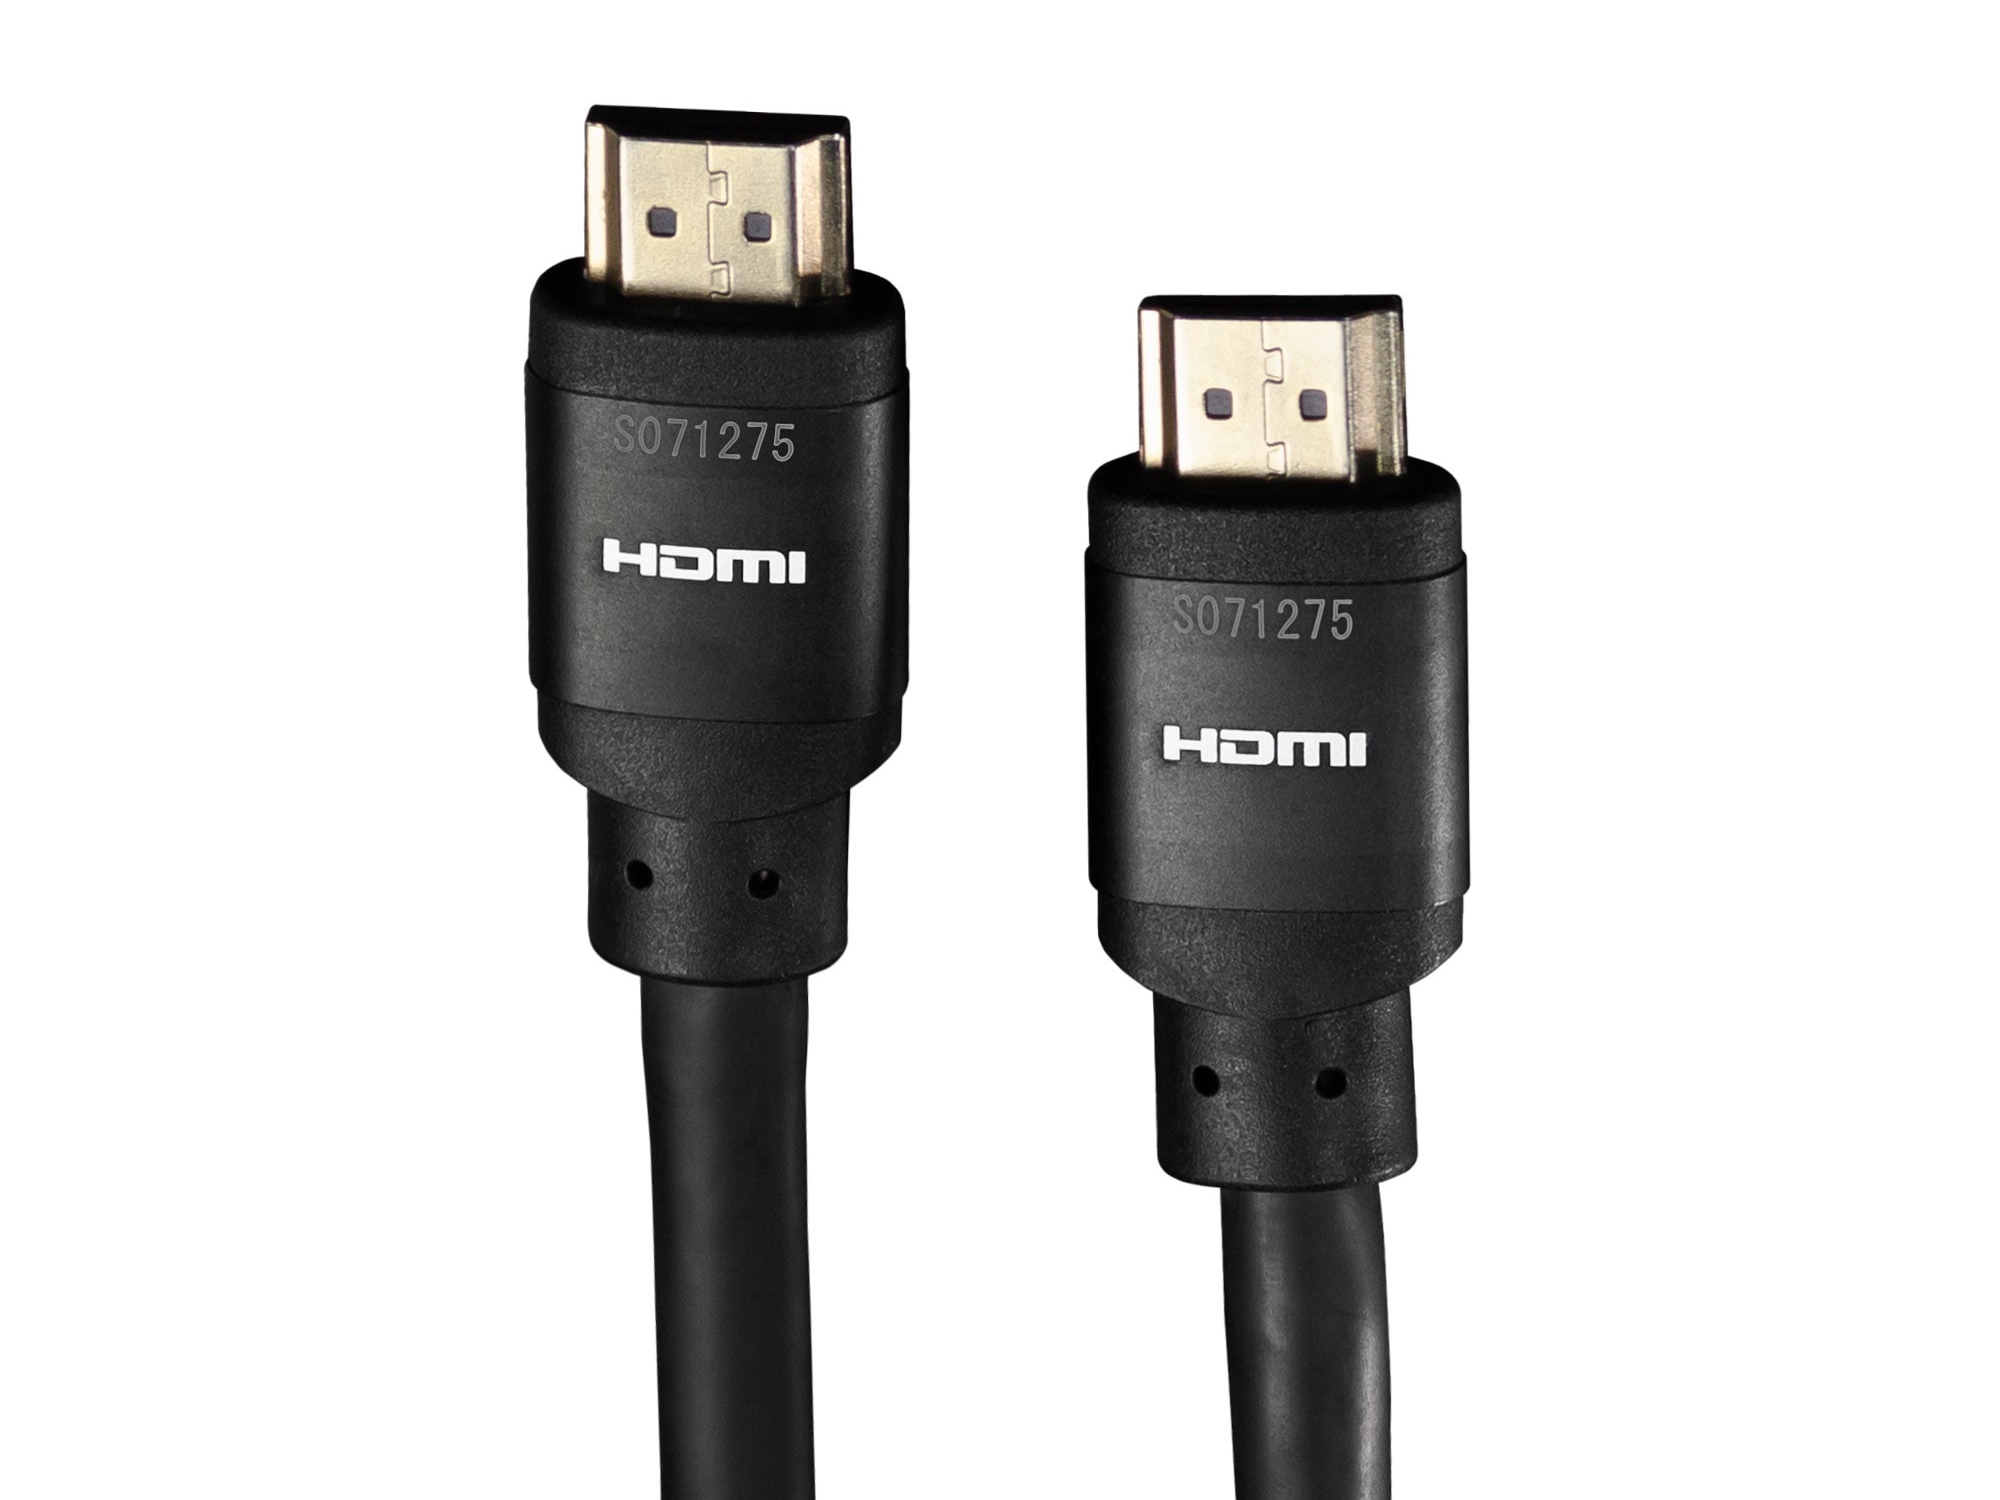 BT-10KUHD-015 1.5m/4.9ft 48Gbps 10K 120 fps/Hz Bullet Train Ultra High Bandwidth/High Speed HDMI Cable by AVPro Edge